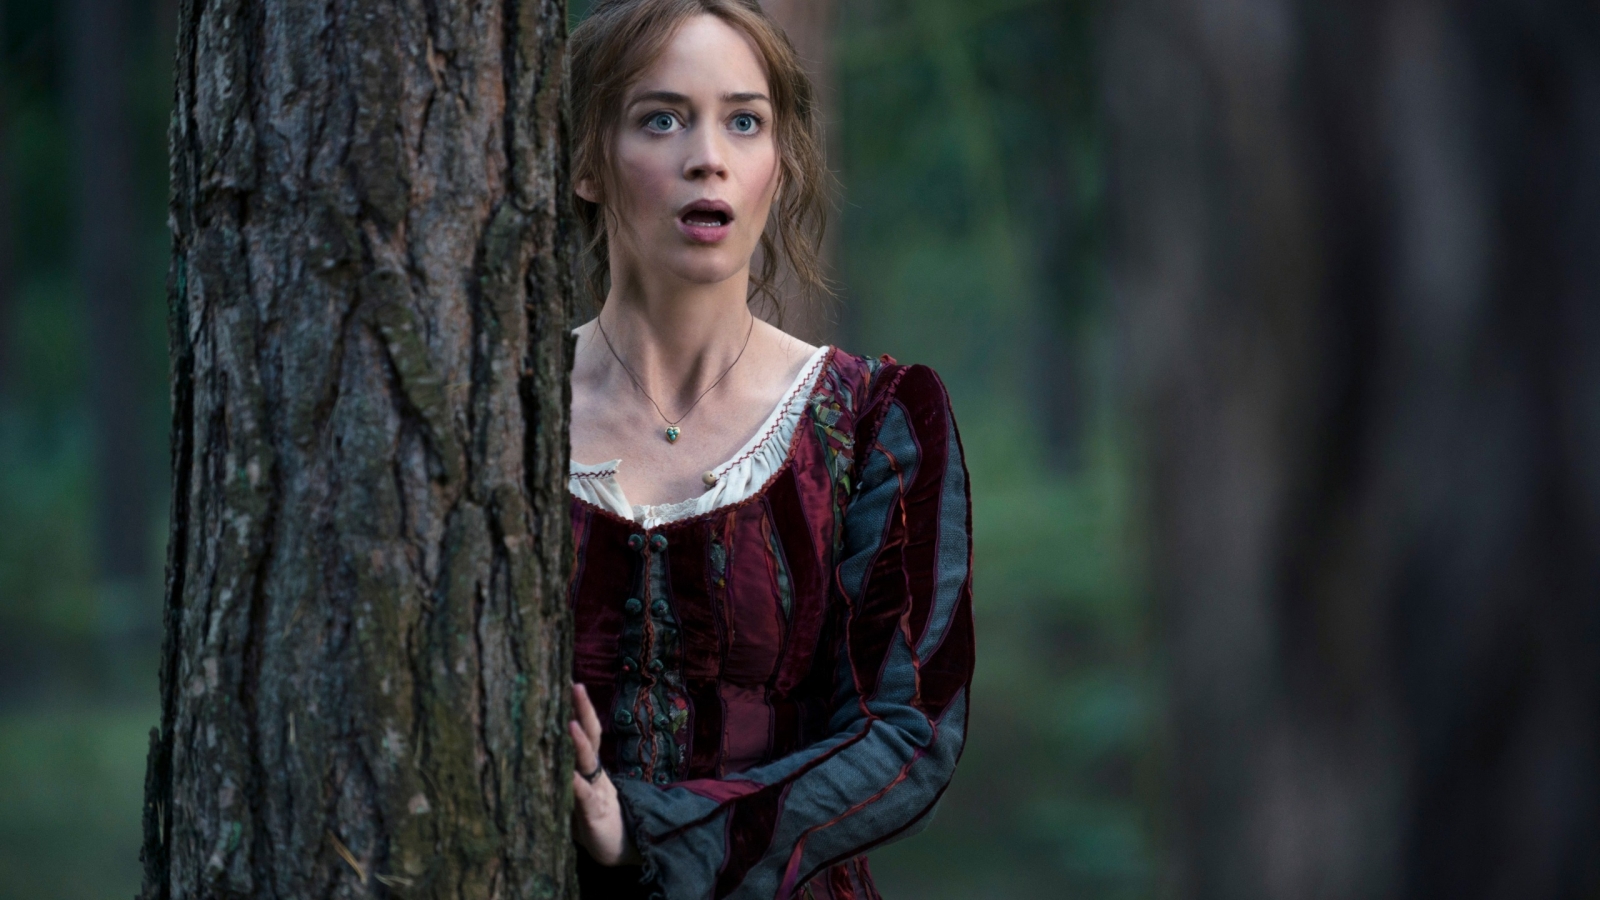 Into the Woods Emily Blunt for 1600 x 900 HDTV resolution